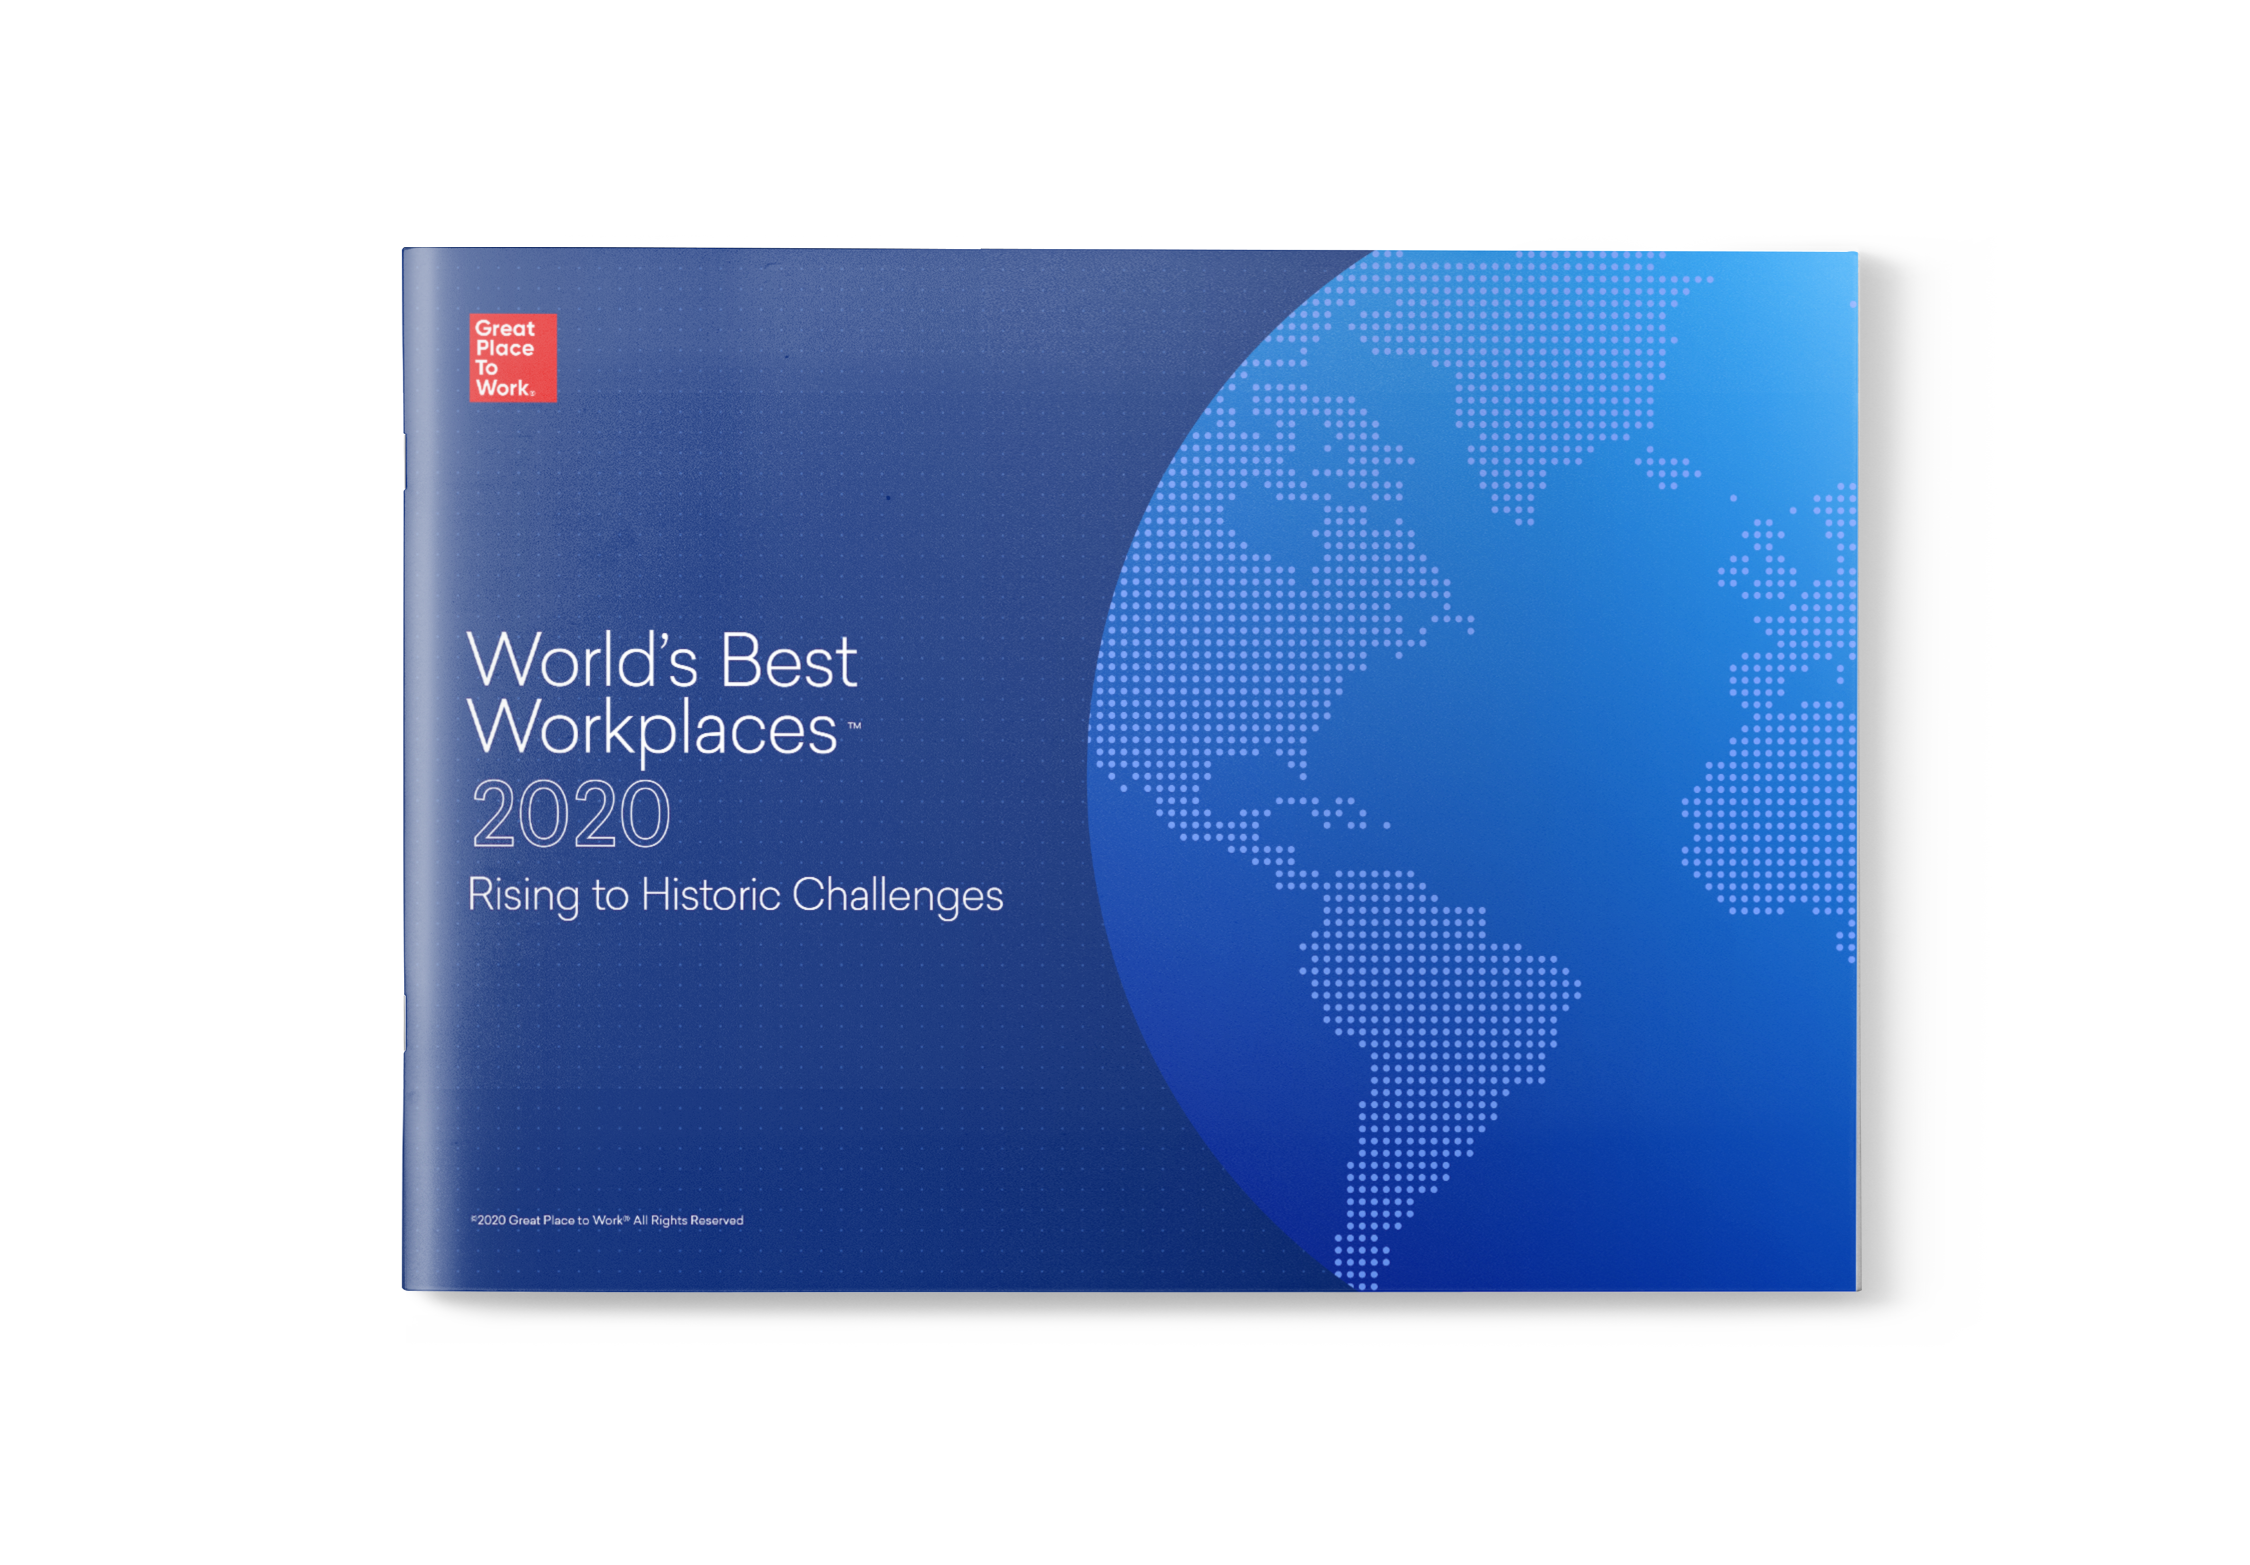 World’s Best Workplaces 2020